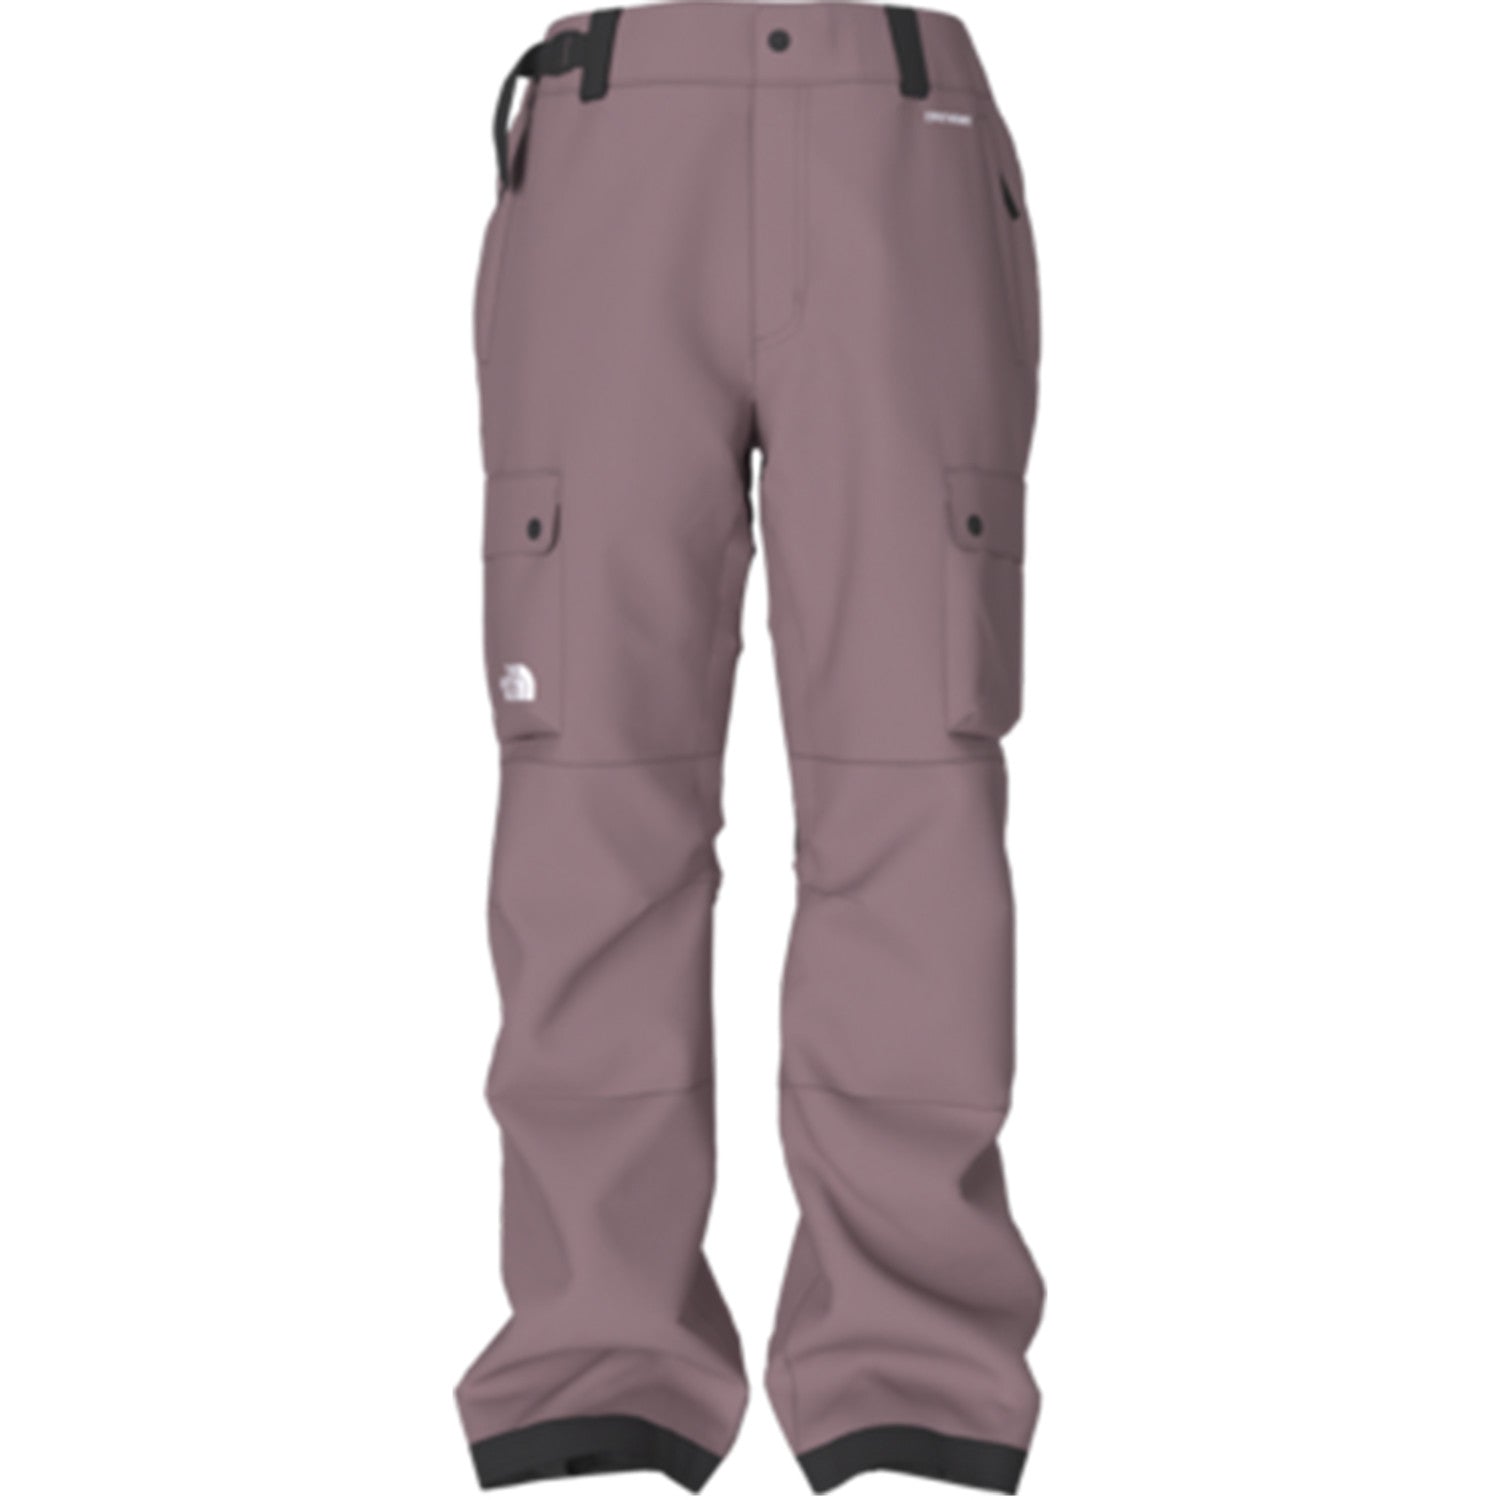 Cargo pants - the north face puffer | North face puffer, The north face  puffer, Winter jackets